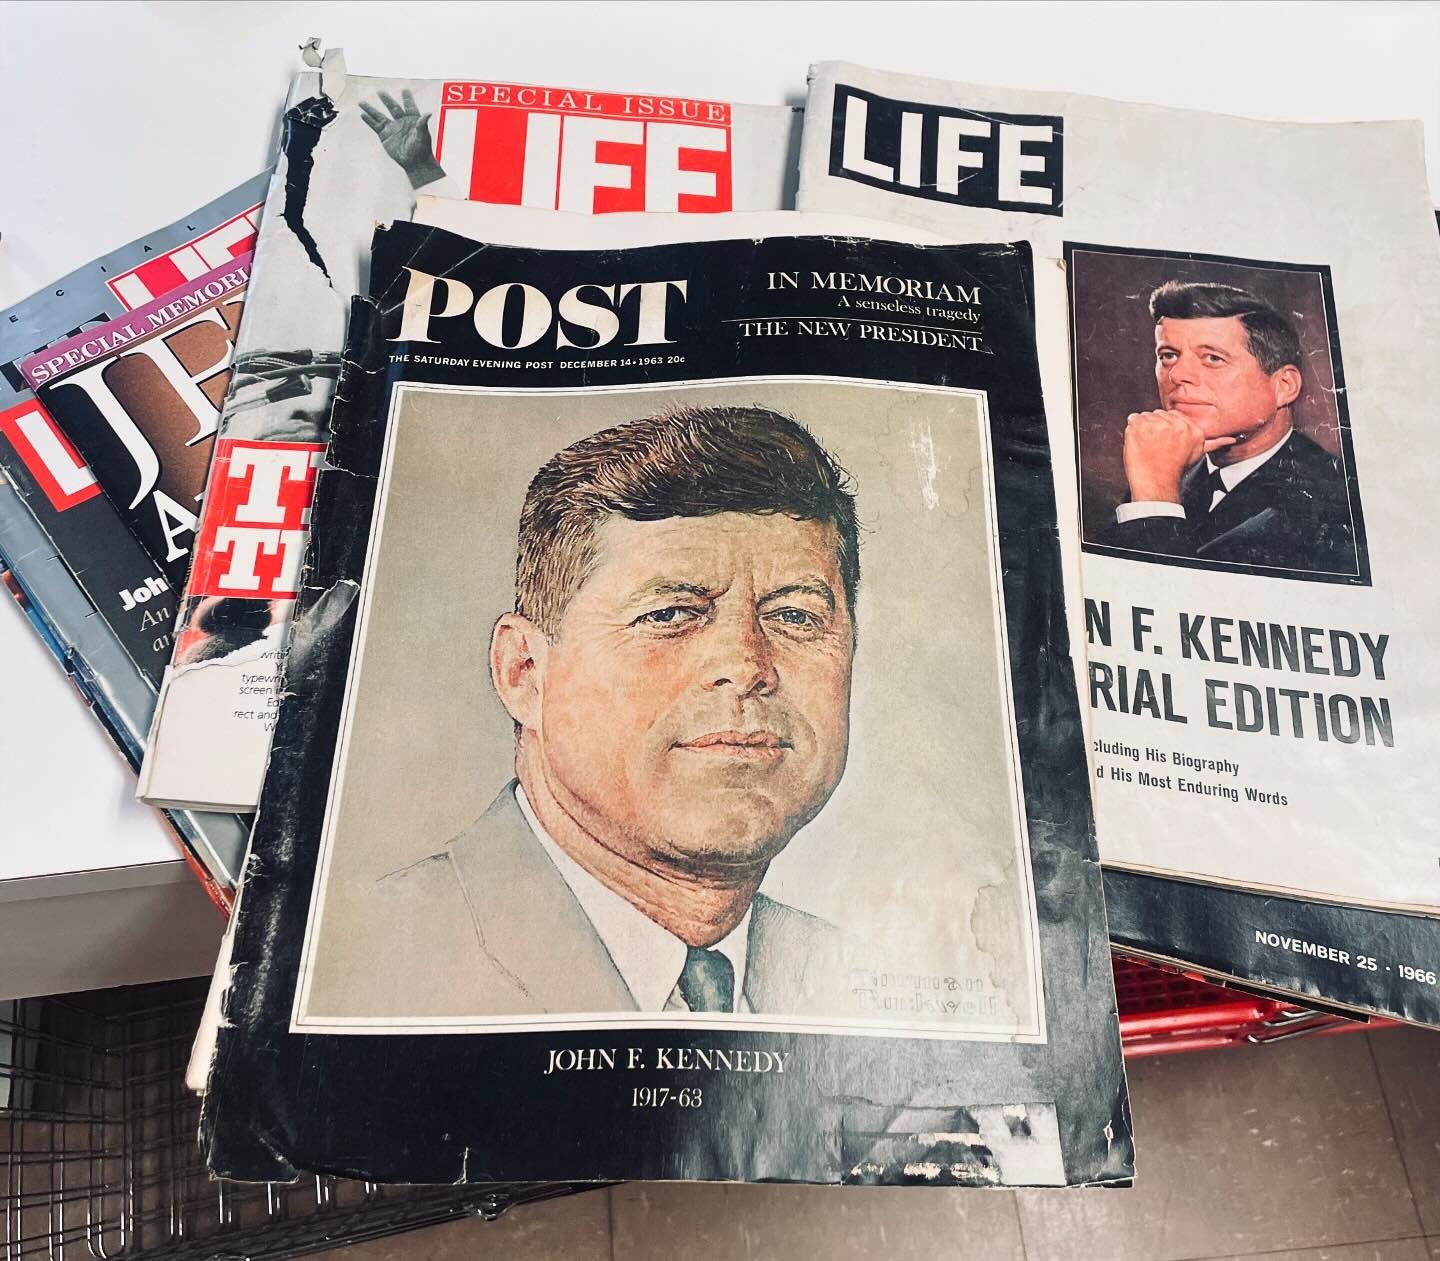 Explore the past, embrace the vintage, and celebrate the timeless legacy of President John F. Kennedy with these vintage magazines! 

#vintagemagazine #jfk #lifemagazine #thrift